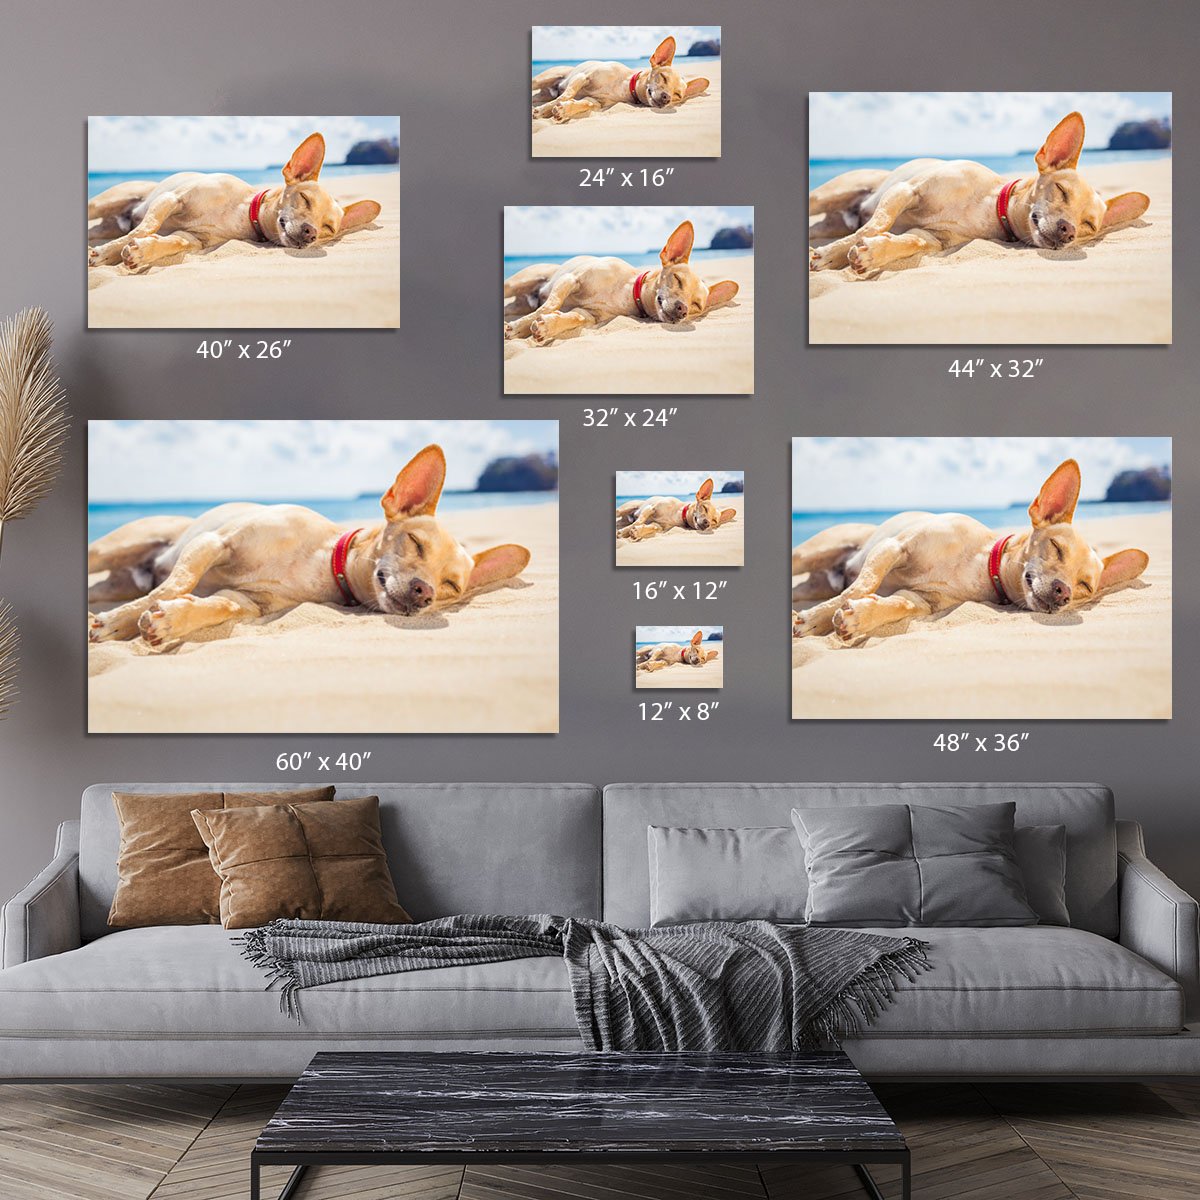 Chihuahua dog relaxing and resting Canvas Print or Poster